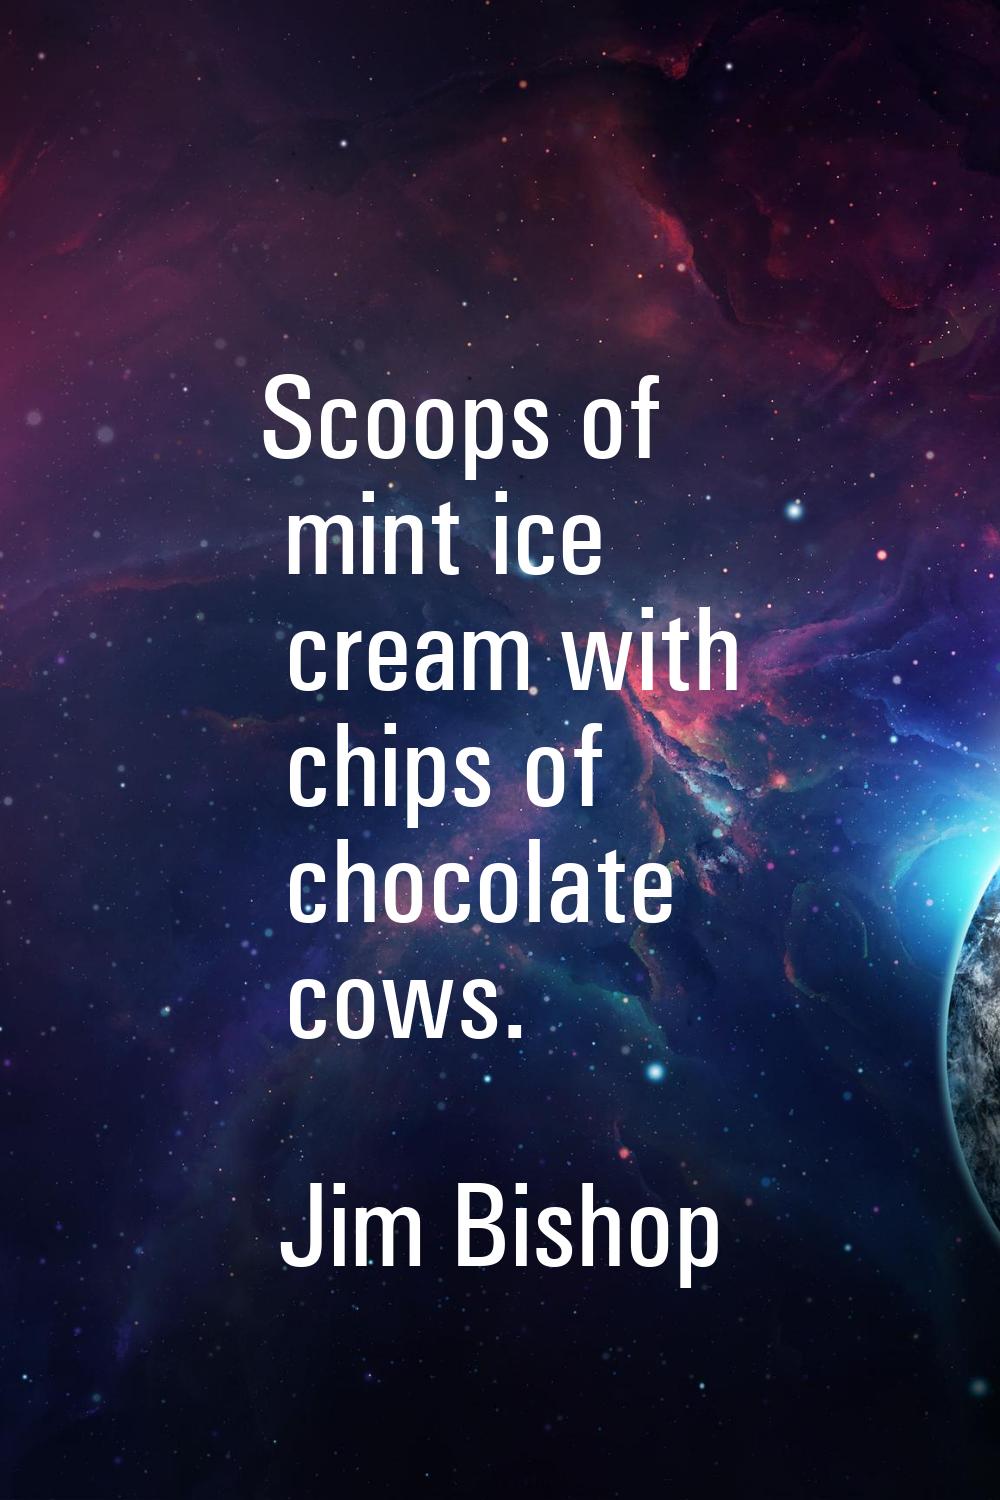 Scoops of mint ice cream with chips of chocolate cows.